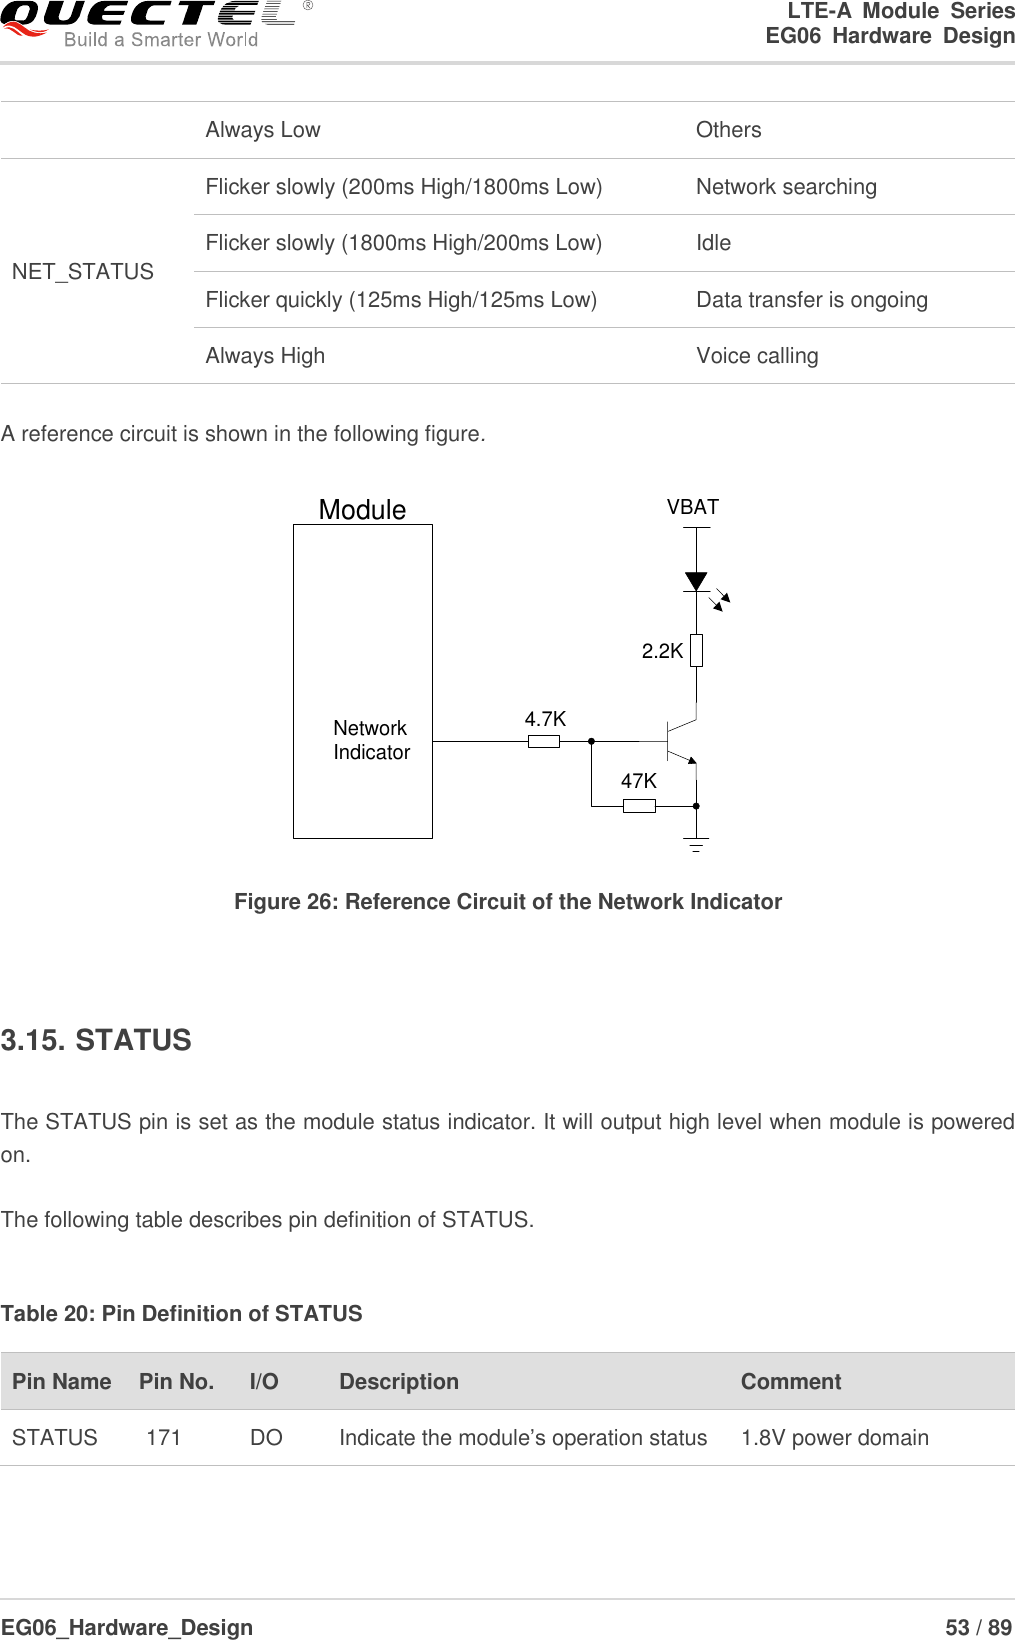 LTE-A  Module  Series                                                  EG06  Hardware  Design  EG06_Hardware_Design                                                               53 / 89     A reference circuit is shown in the following figure. 4.7K47KVBAT2.2KModuleNetwork Indicator Figure 26: Reference Circuit of the Network Indicator  3.15. STATUS  The STATUS pin is set as the module status indicator. It will output high level when module is powered on.  The following table describes pin definition of STATUS.  Table 20: Pin Definition of STATUS   Always Low Others NET_STATUS Flicker slowly (200ms High/1800ms Low) Network searching Flicker slowly (1800ms High/200ms Low) Idle Flicker quickly (125ms High/125ms Low) Data transfer is ongoing Always High Voice calling Pin Name   Pin No. I/O Description   Comment STATUS 171 DO Indicate the module’s operation status 1.8V power domain 